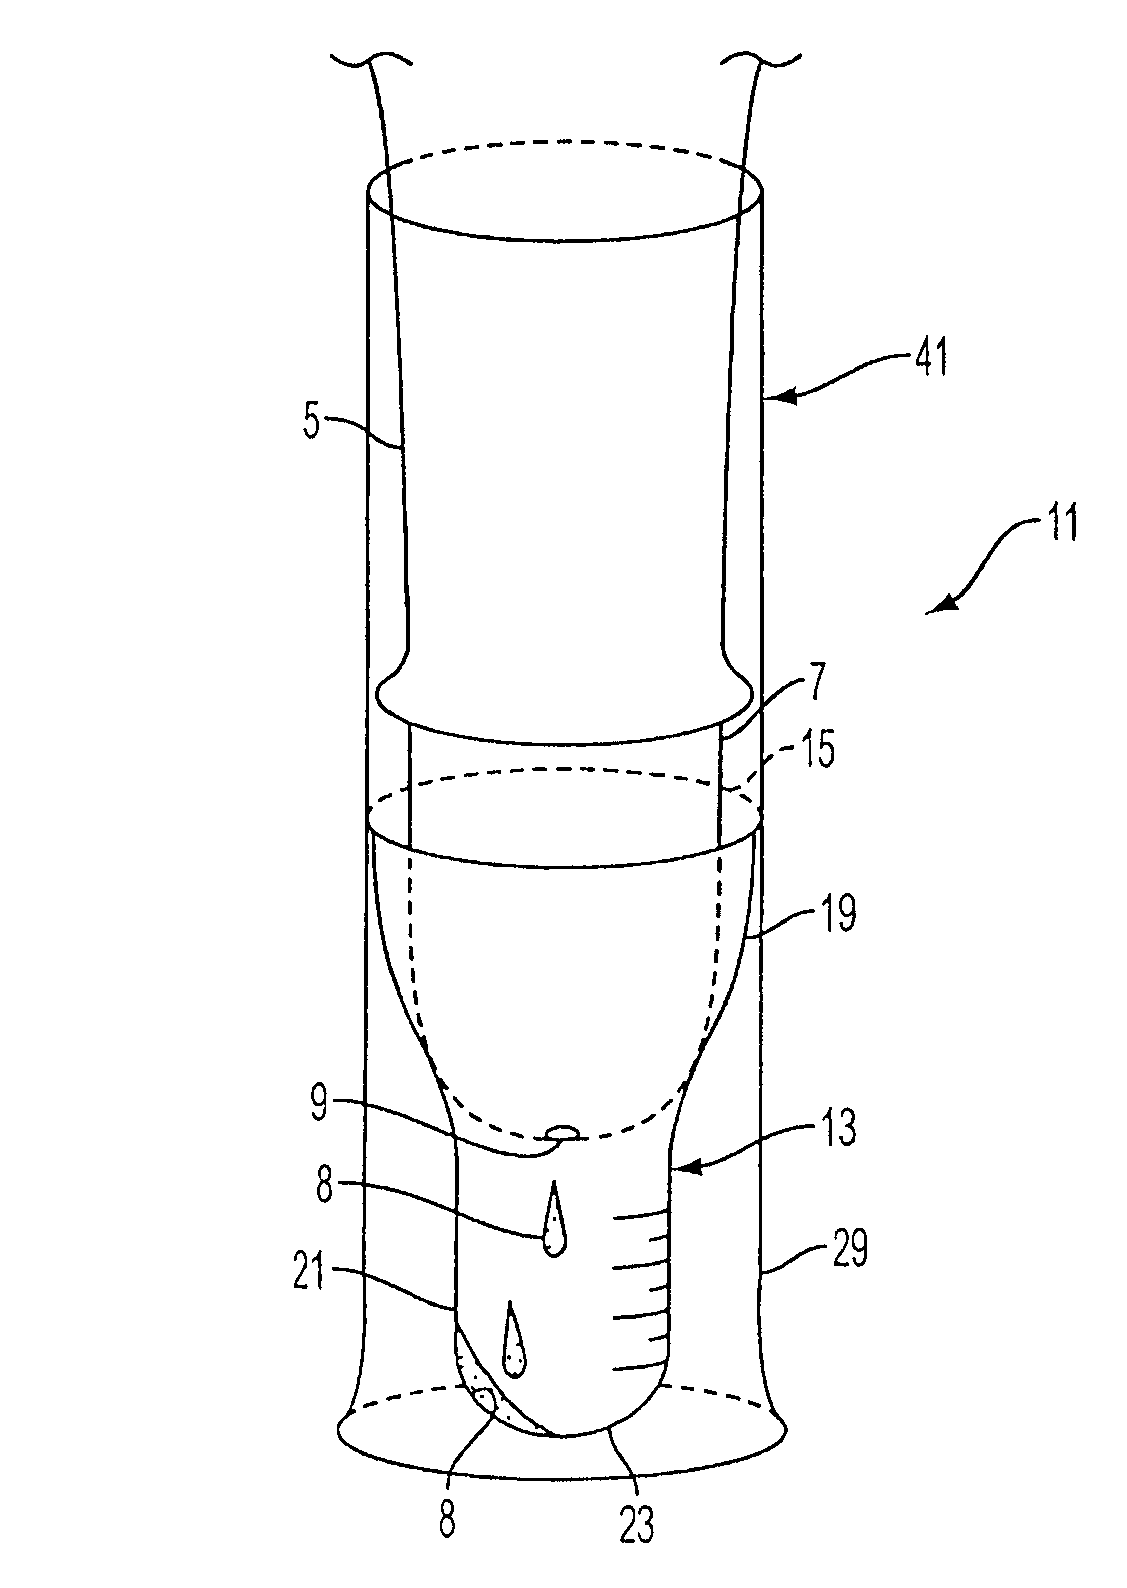 Glans compatible single unit semen collection and storage device, kit and related methods of use